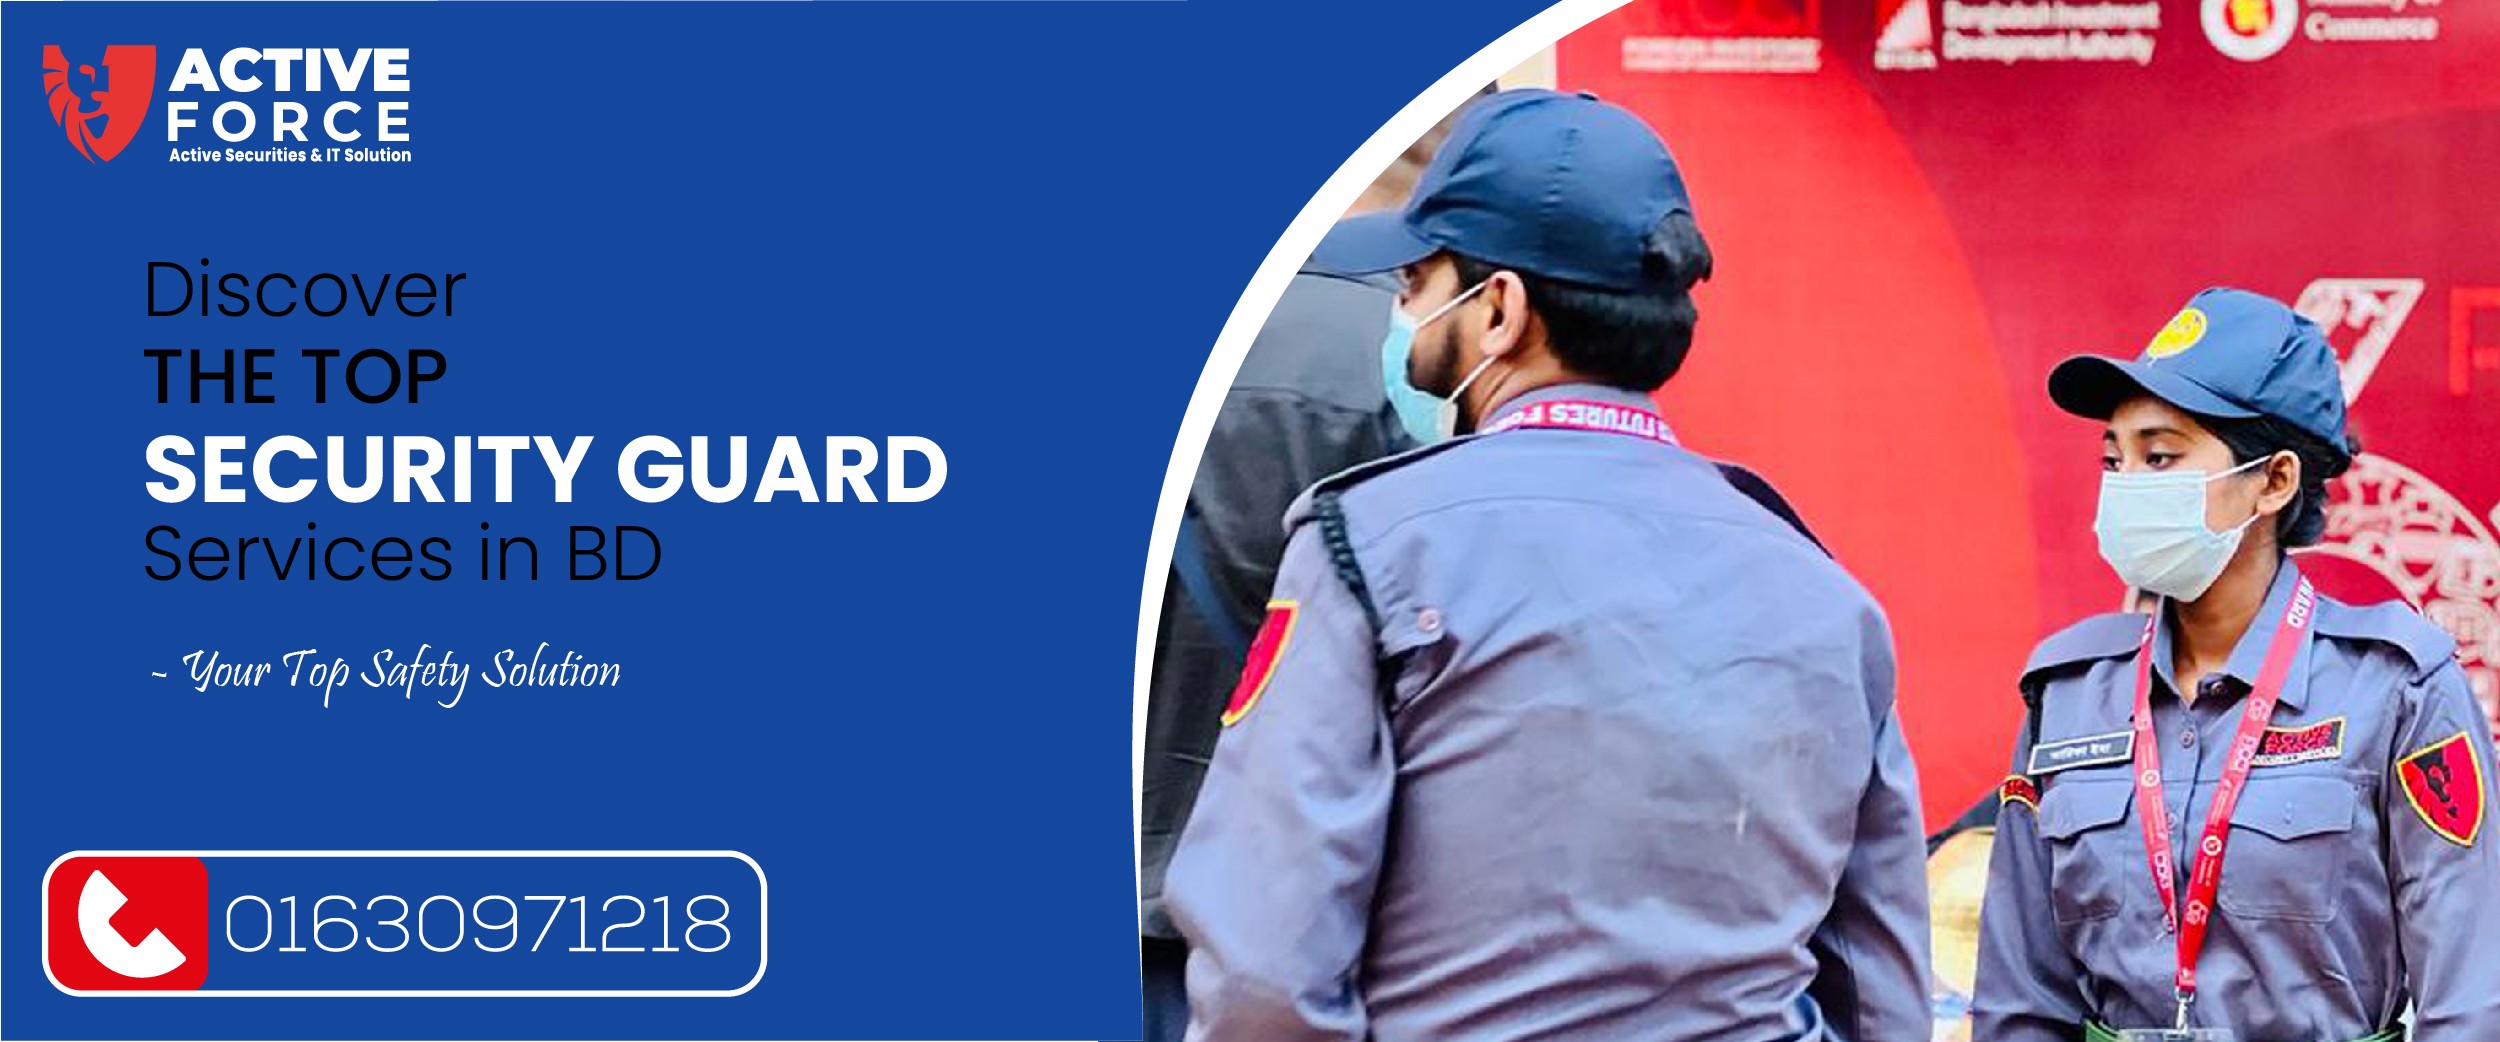 Discover the top Security Guard Services in BD - Your Top Safety Solution